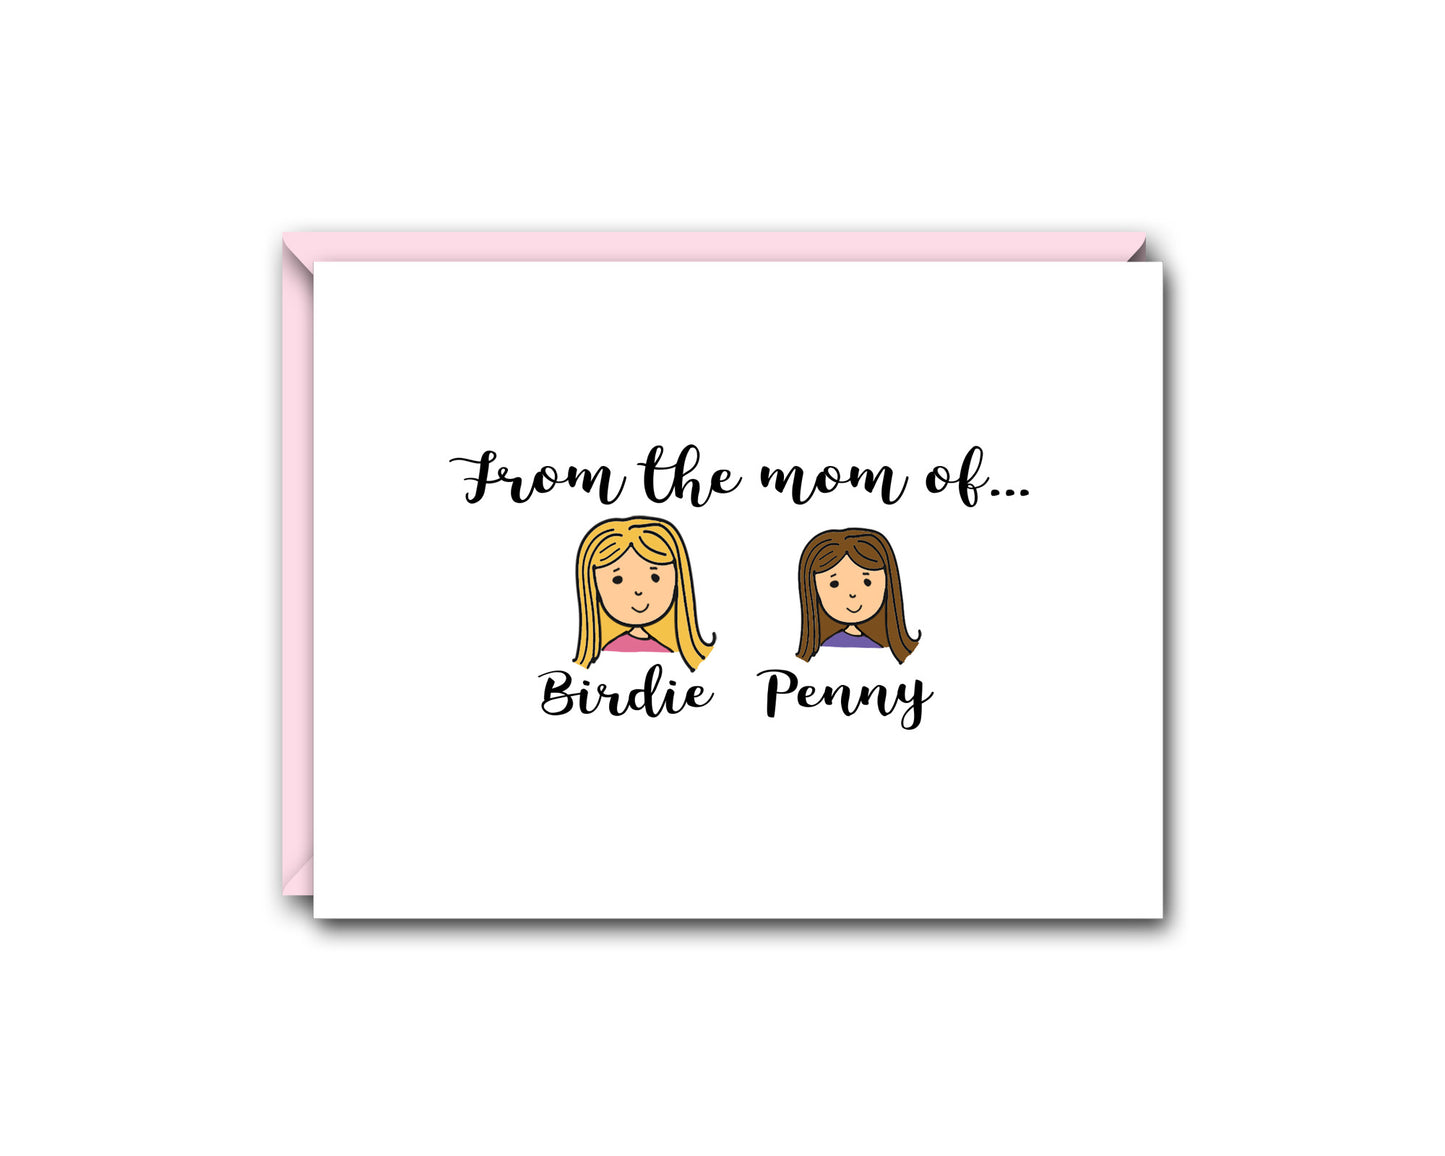 FROM THE MOM OF... TWO CHILDREN PERSONALIZED NOTE CARD SET